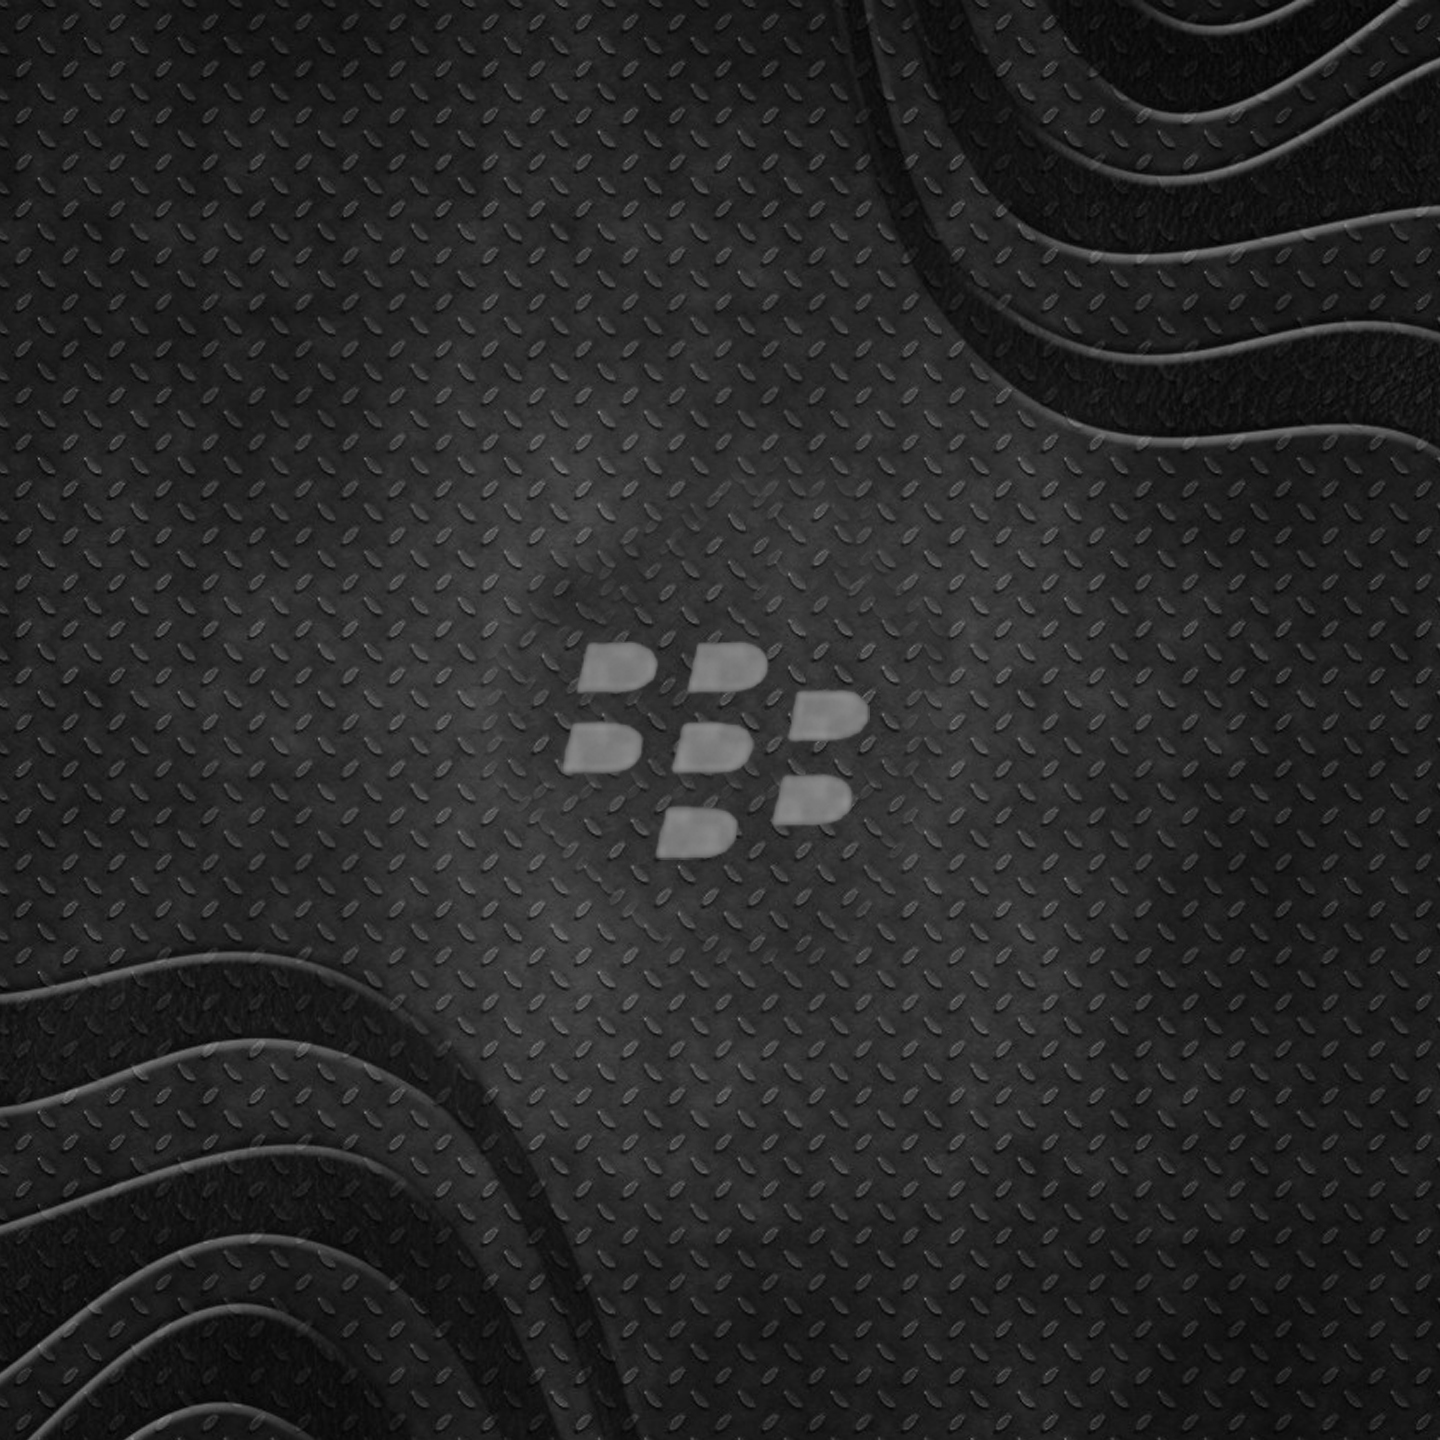 Blackberry The Passport Wallpaper For Personal Account